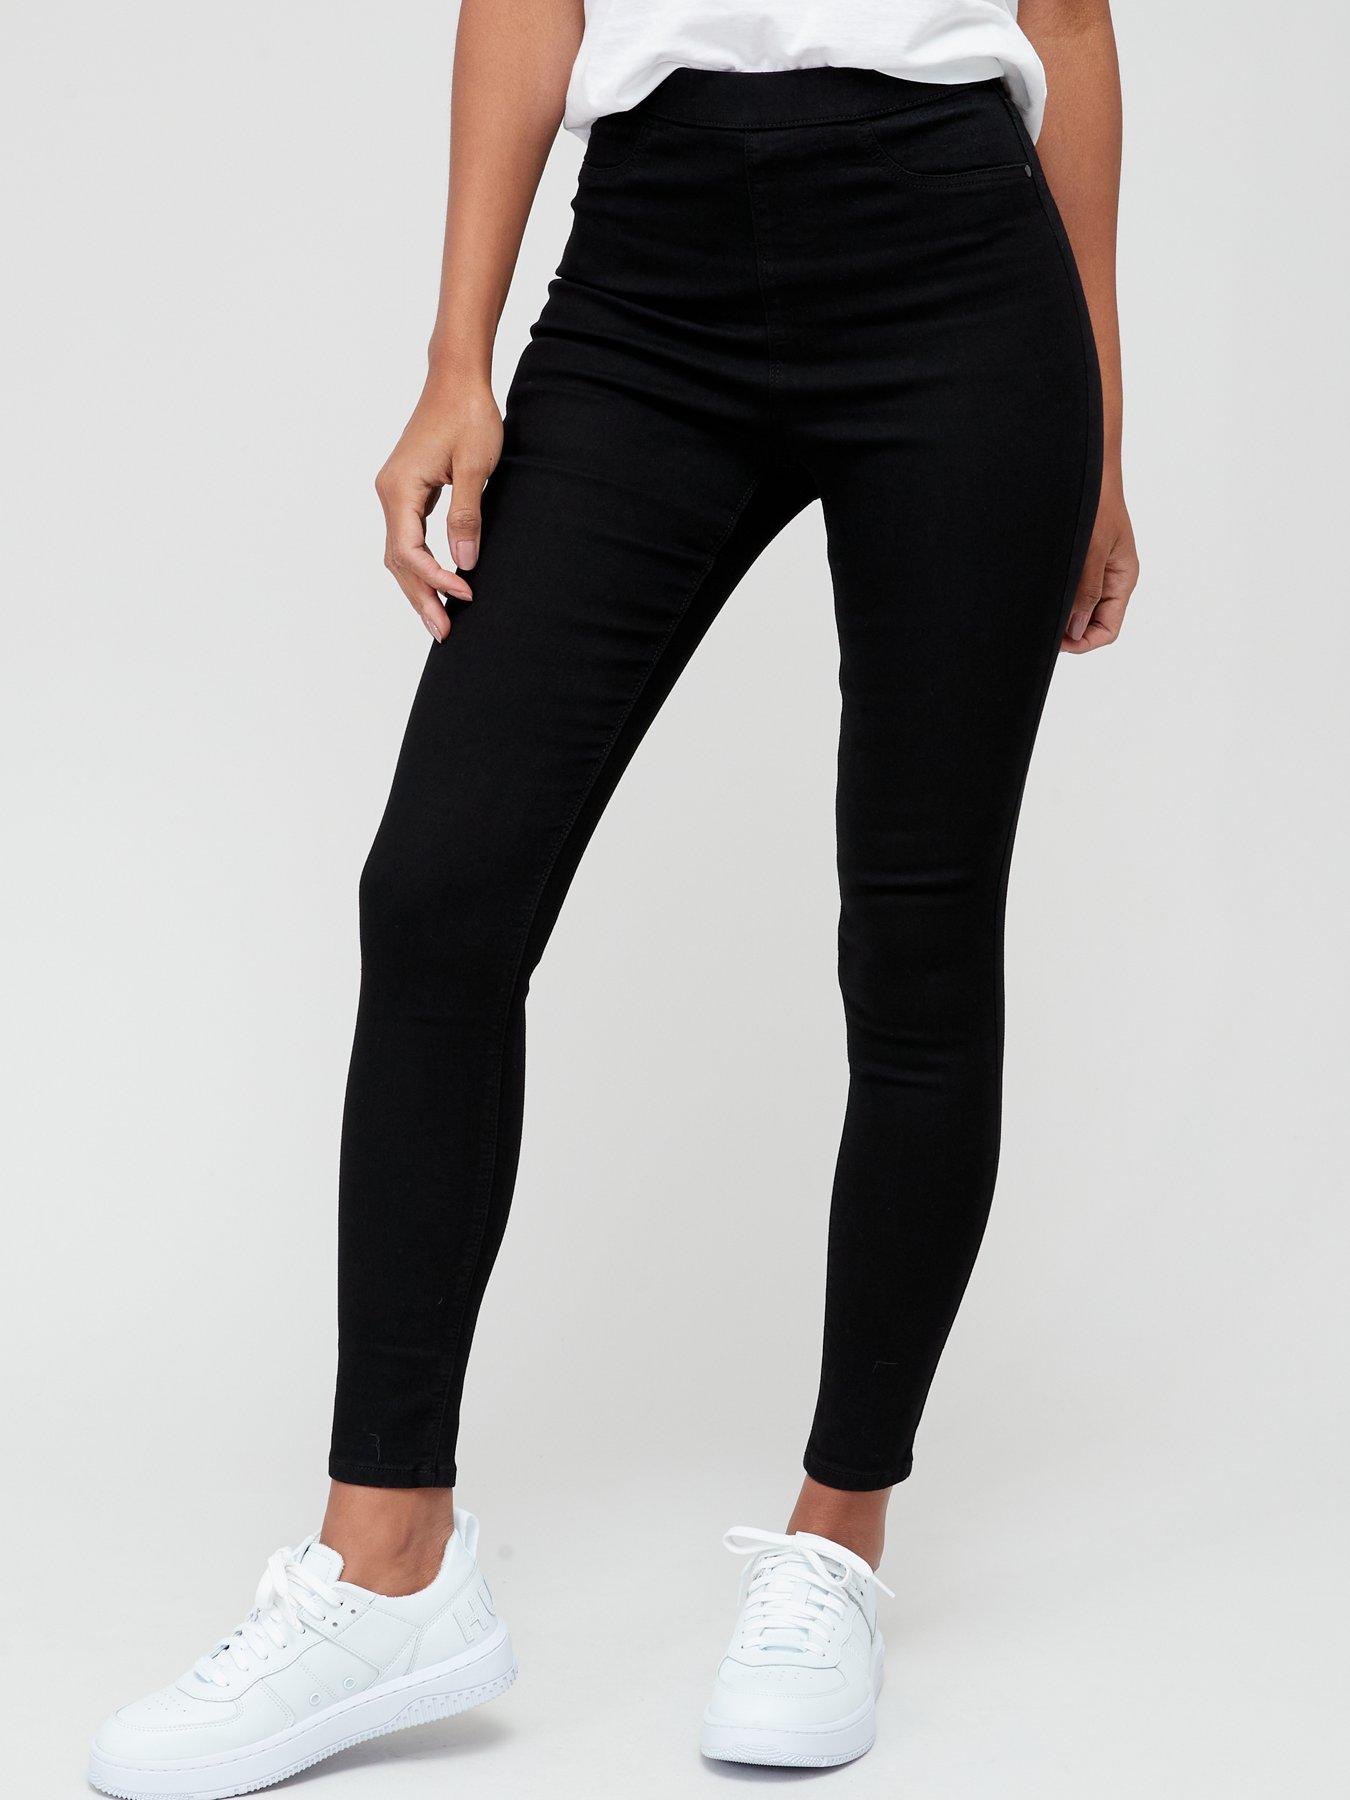 New Look Petite highwaisted jegging in black